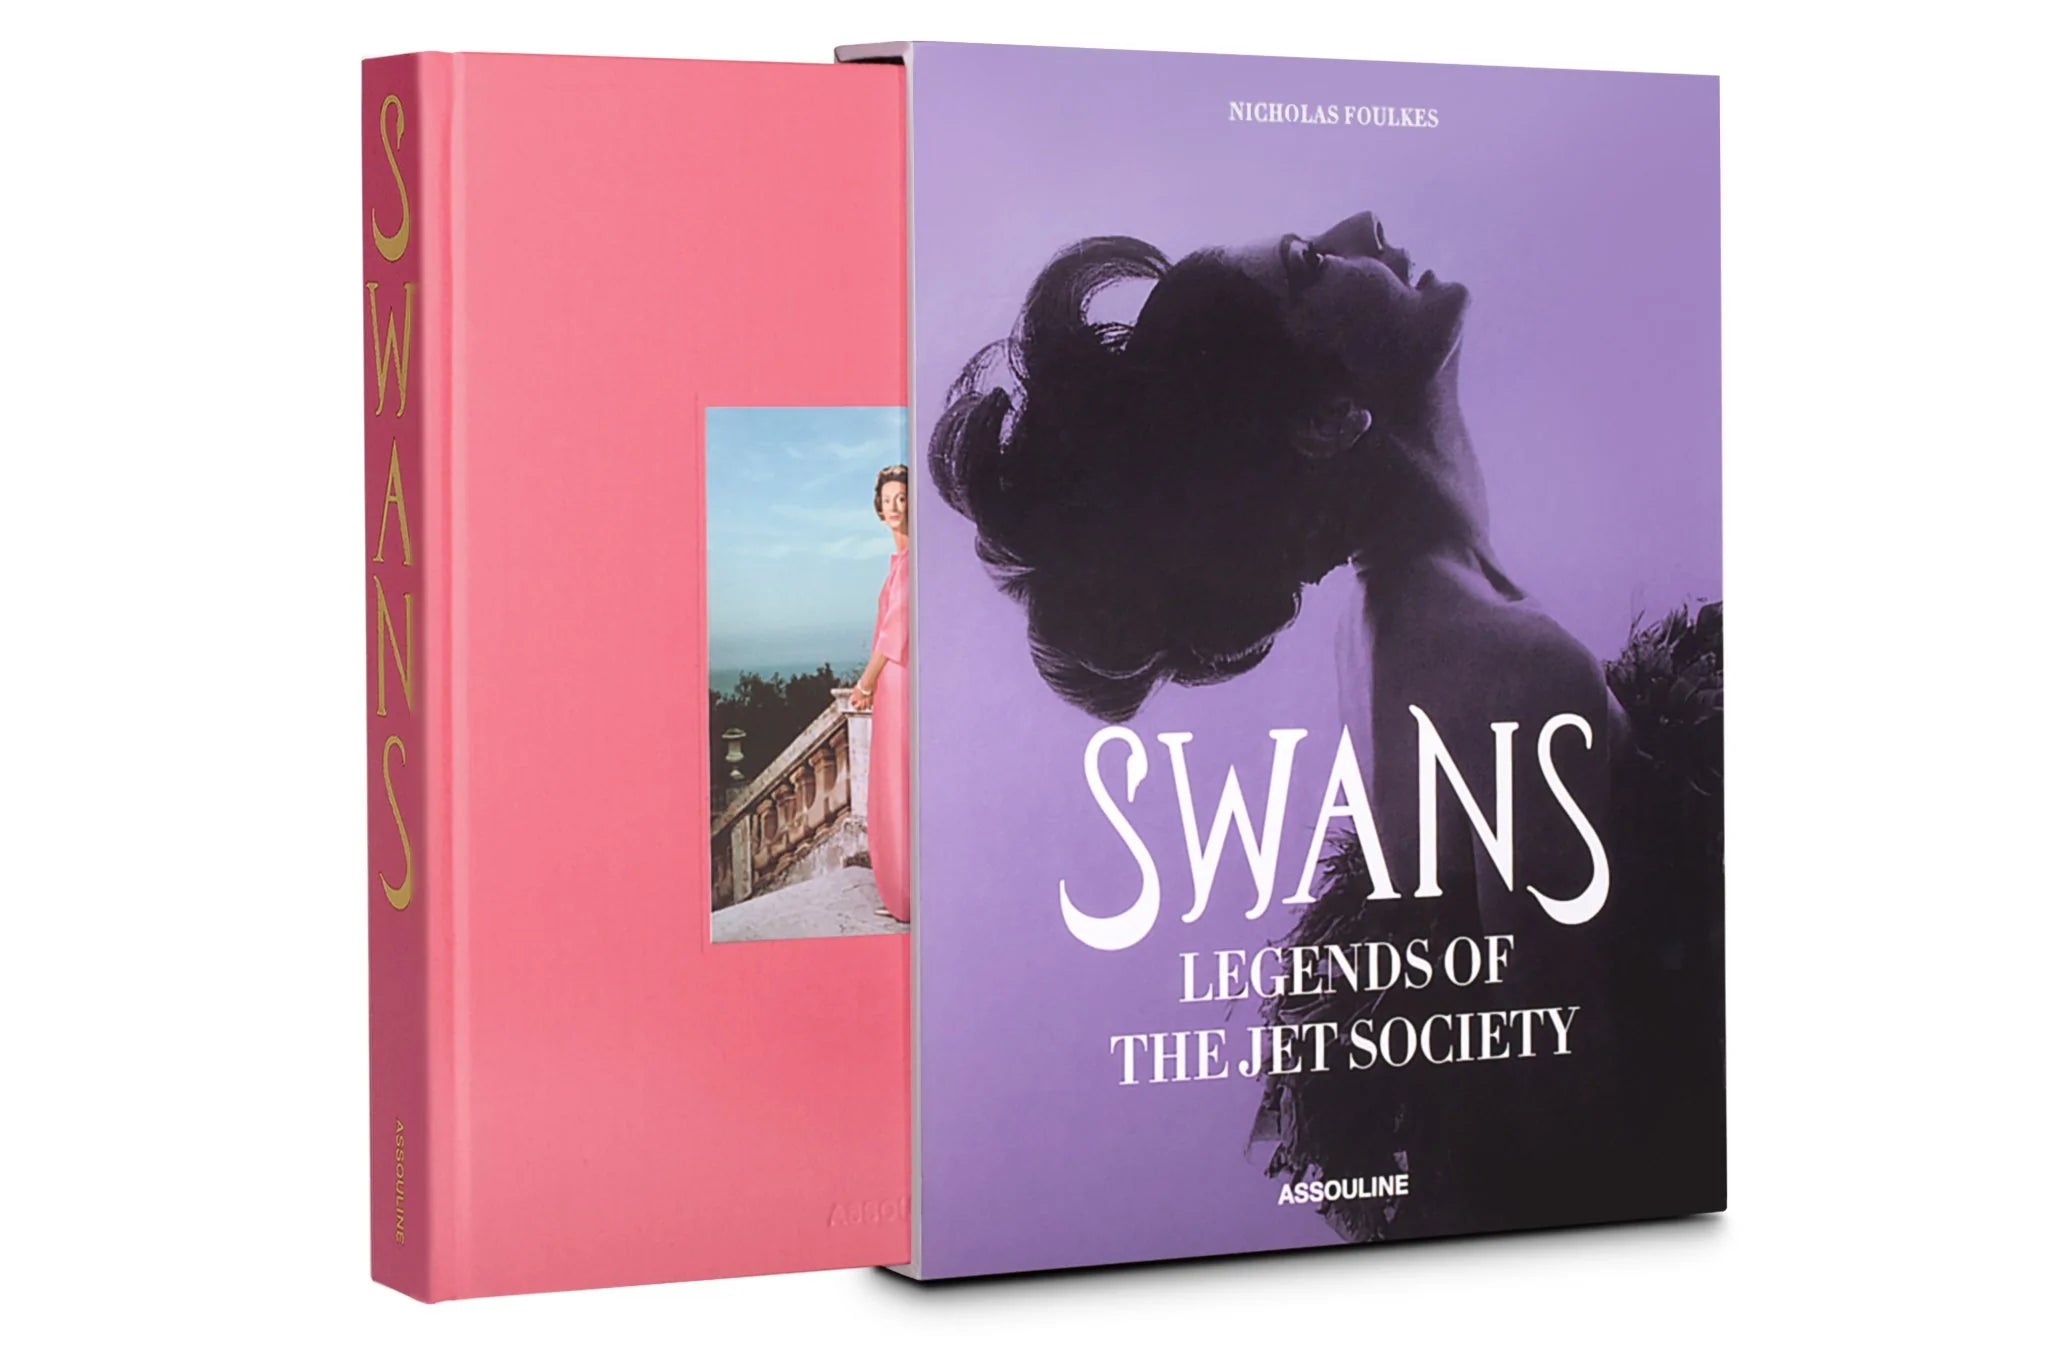 Swans: Legends of the Jet Society